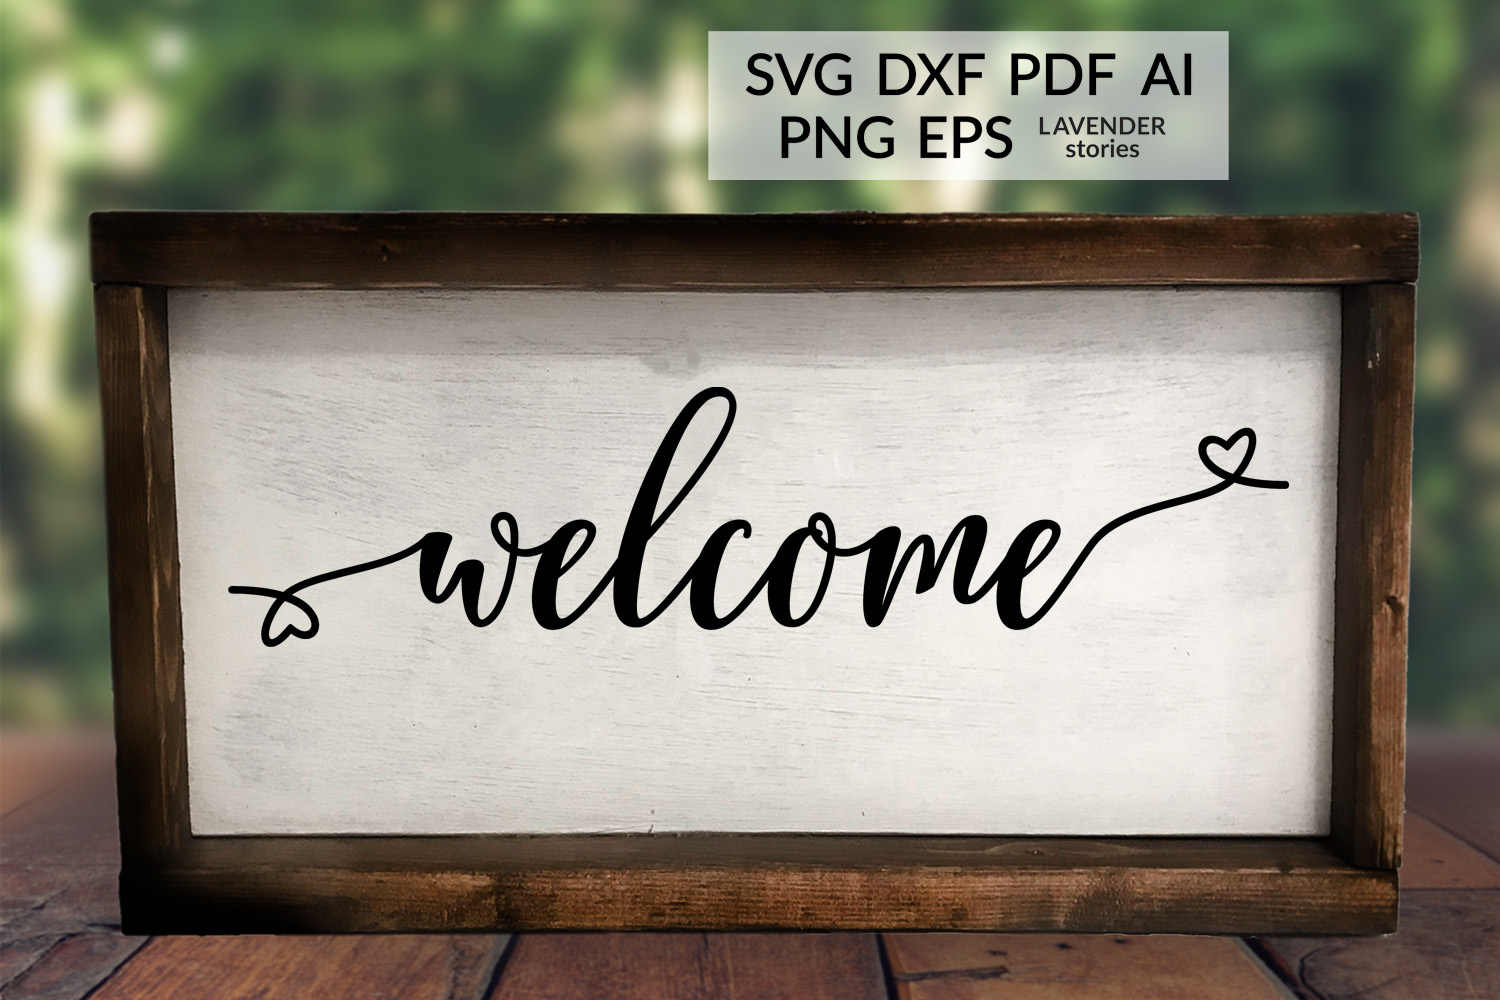 Welcome - Wedding sign SVG cut file